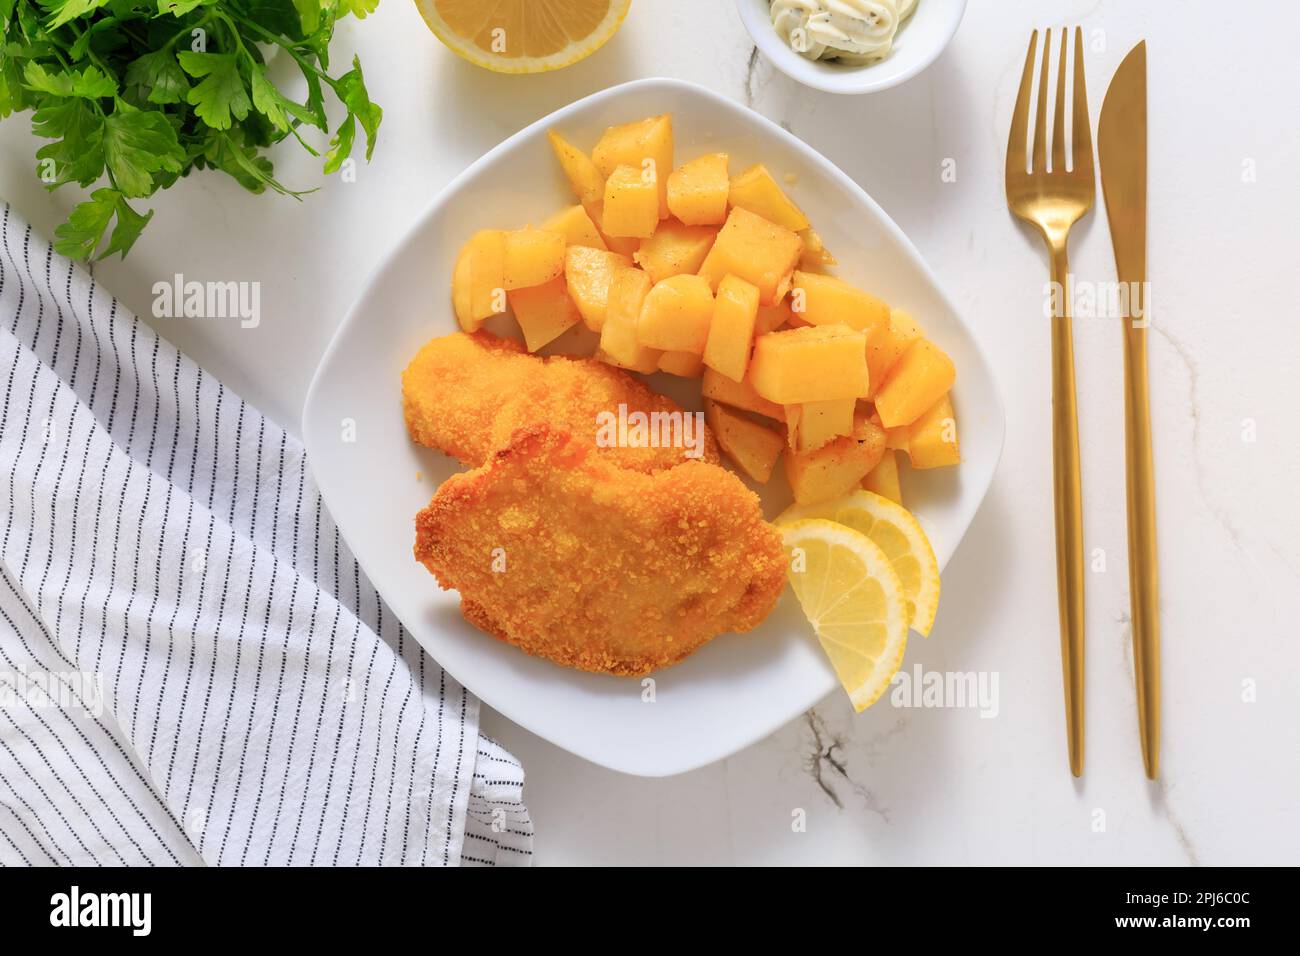 Homemade chicken escalope with baked potatoes, mayonnaise and lemon Stock Photo